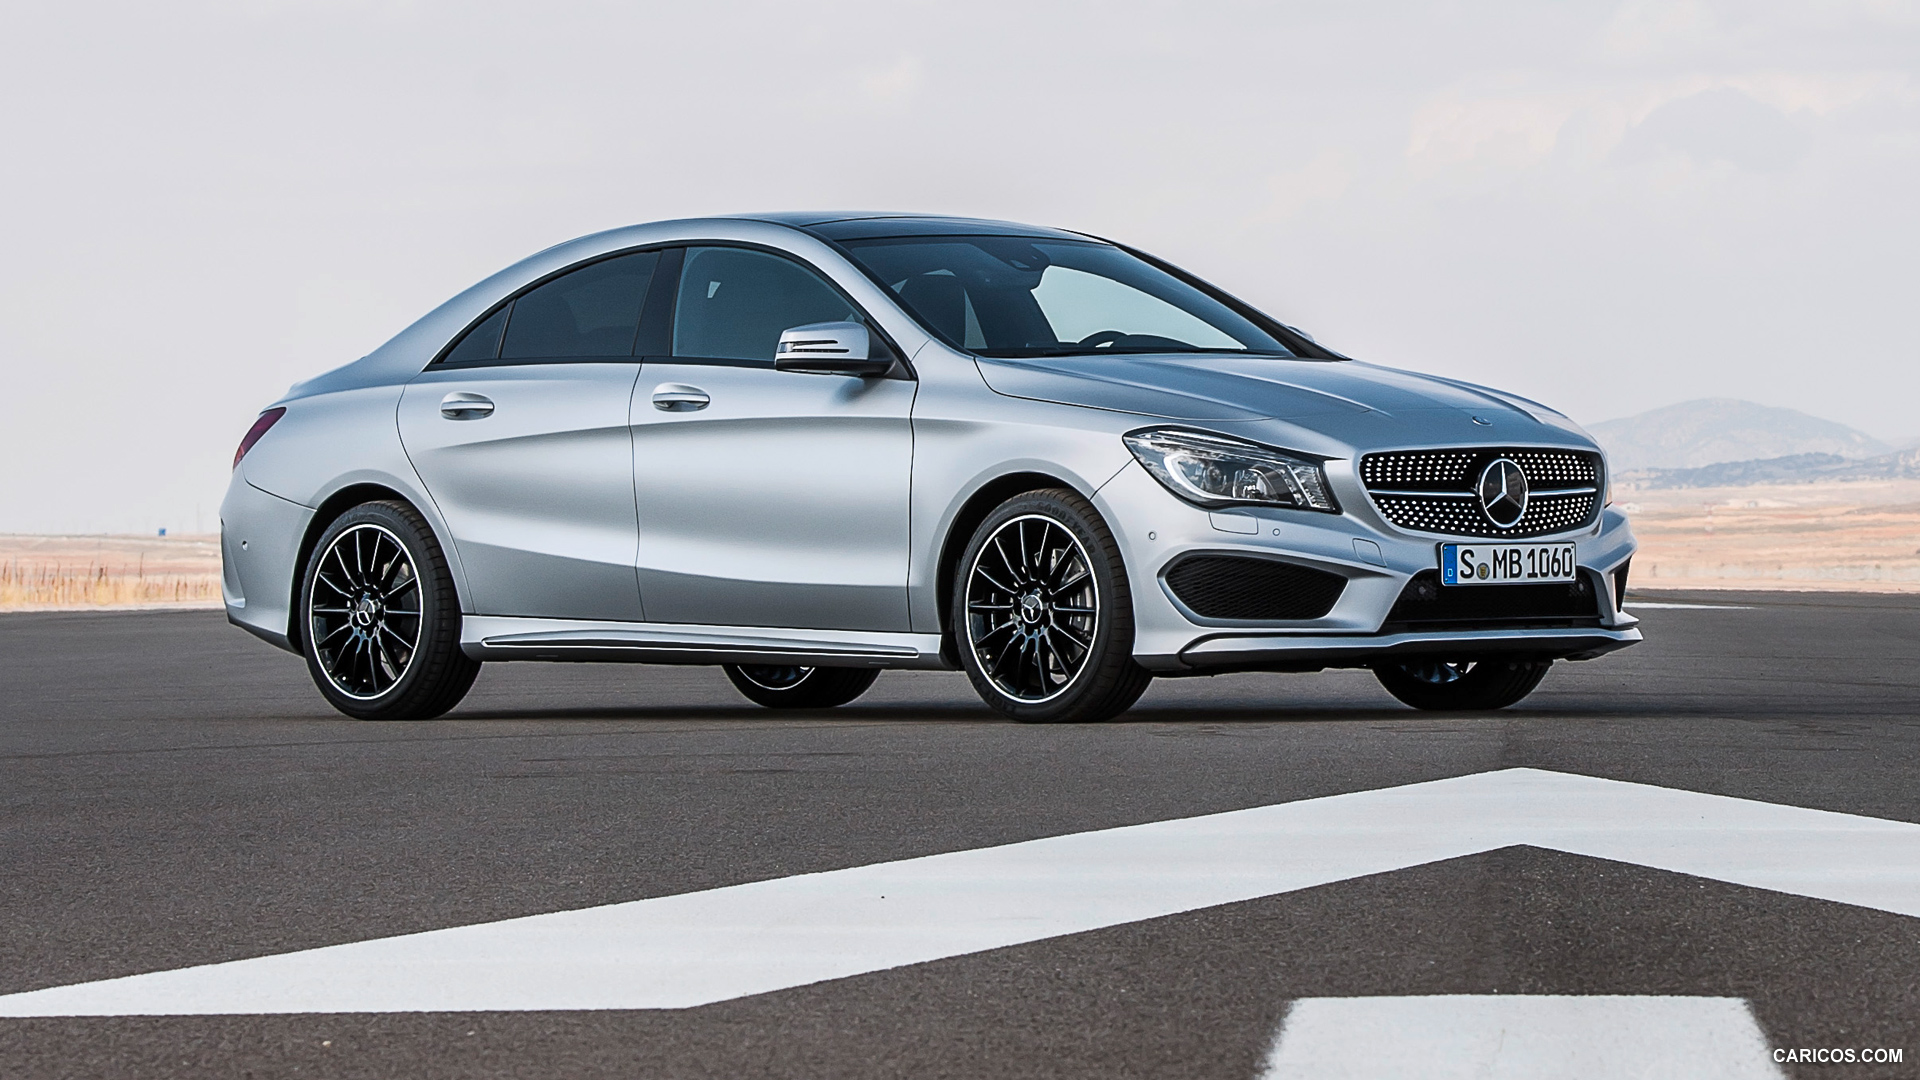 2014 Mercedes-Benz CLA-Class CLA 250 Edition 1 - Front, #15 of 183